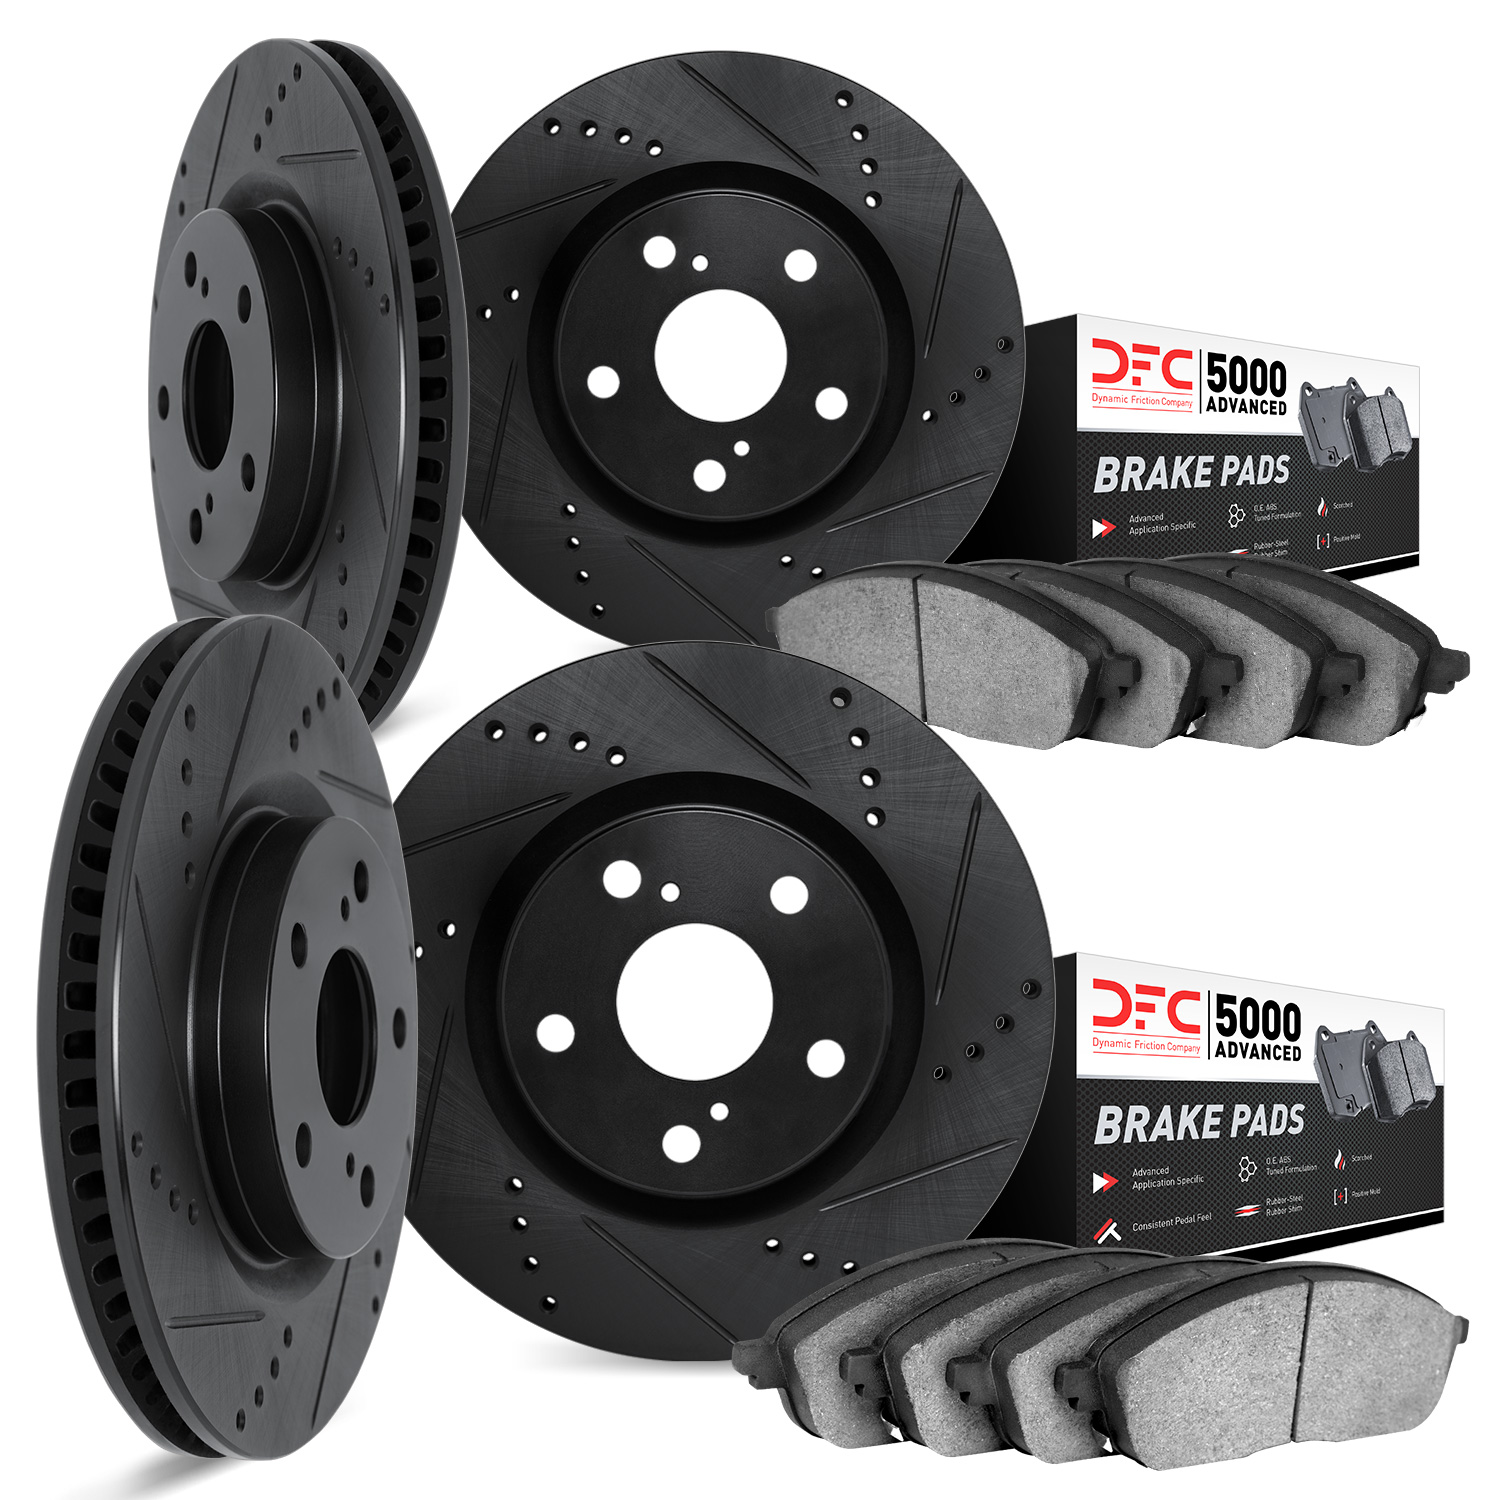 8504-13037 Drilled/Slotted Brake Rotors w/5000 Advanced Brake Pads Kit [Black], 2006-2014 Subaru, Position: Front and Rear